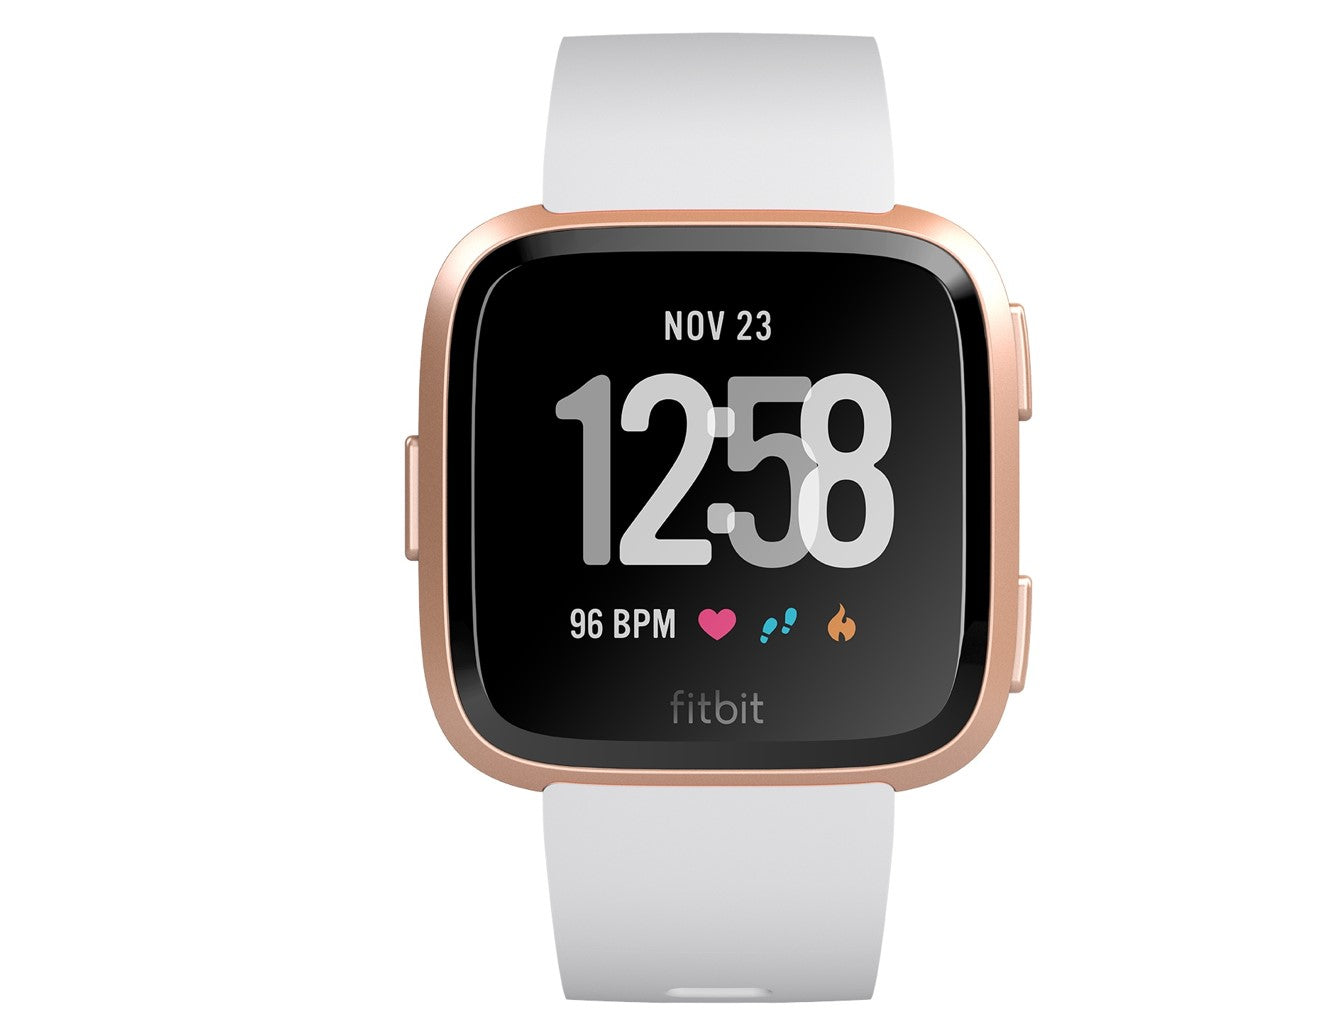 Fitbit FBR504RGWT-RB Versa Smart Watch, Rose Gold /White, One Size - Certified Refurbished